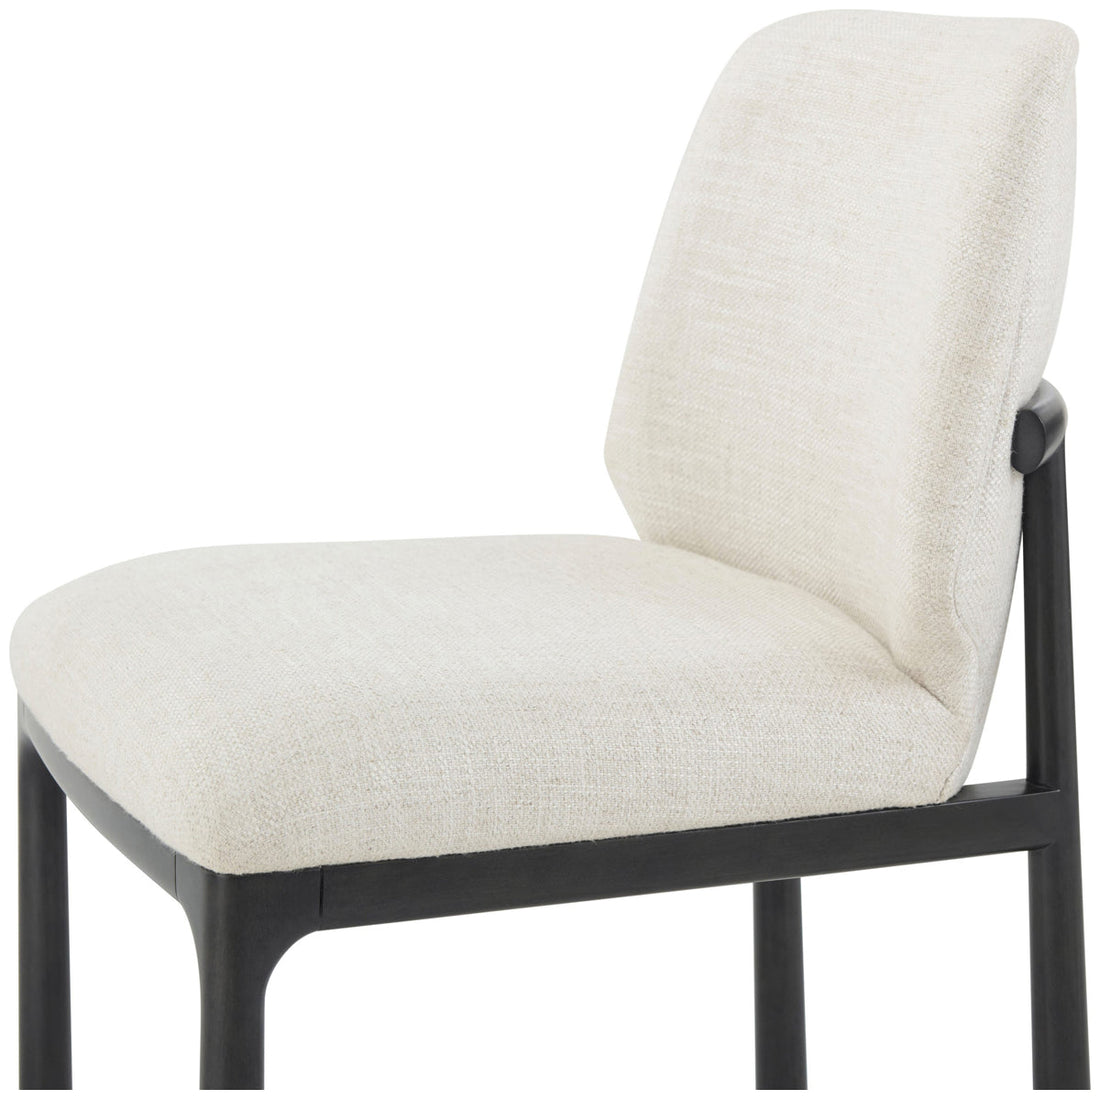 Theodore Alexander Kesden Dining Side Chair, Set of 2